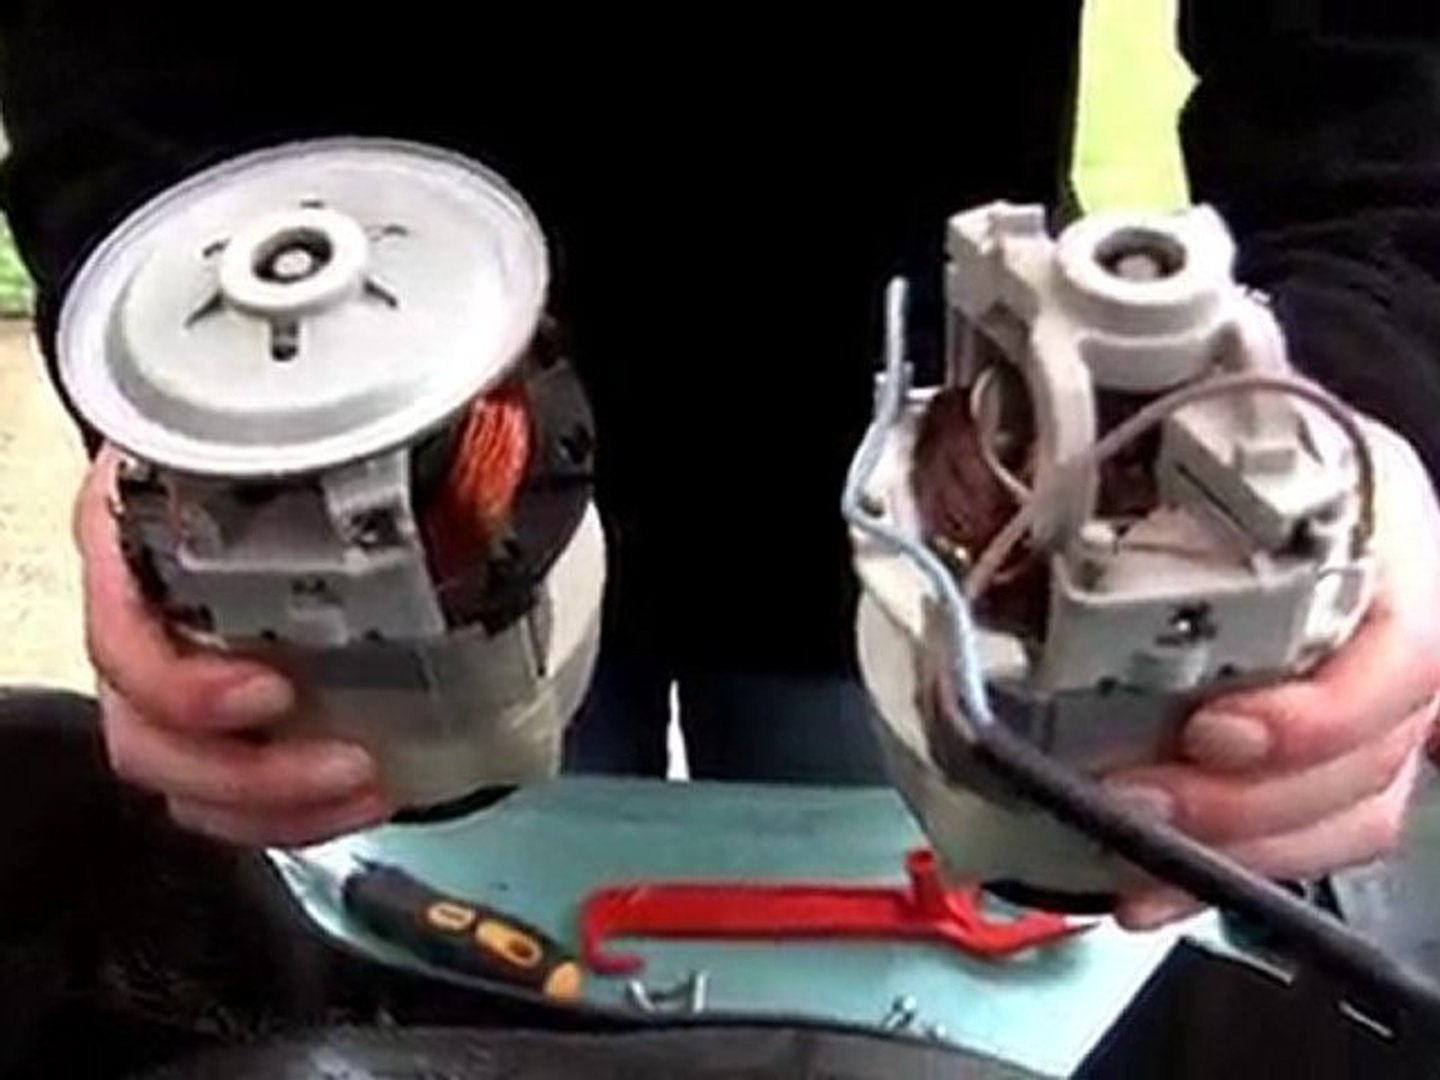 How to replace a Flymo motor - video Dailymotion